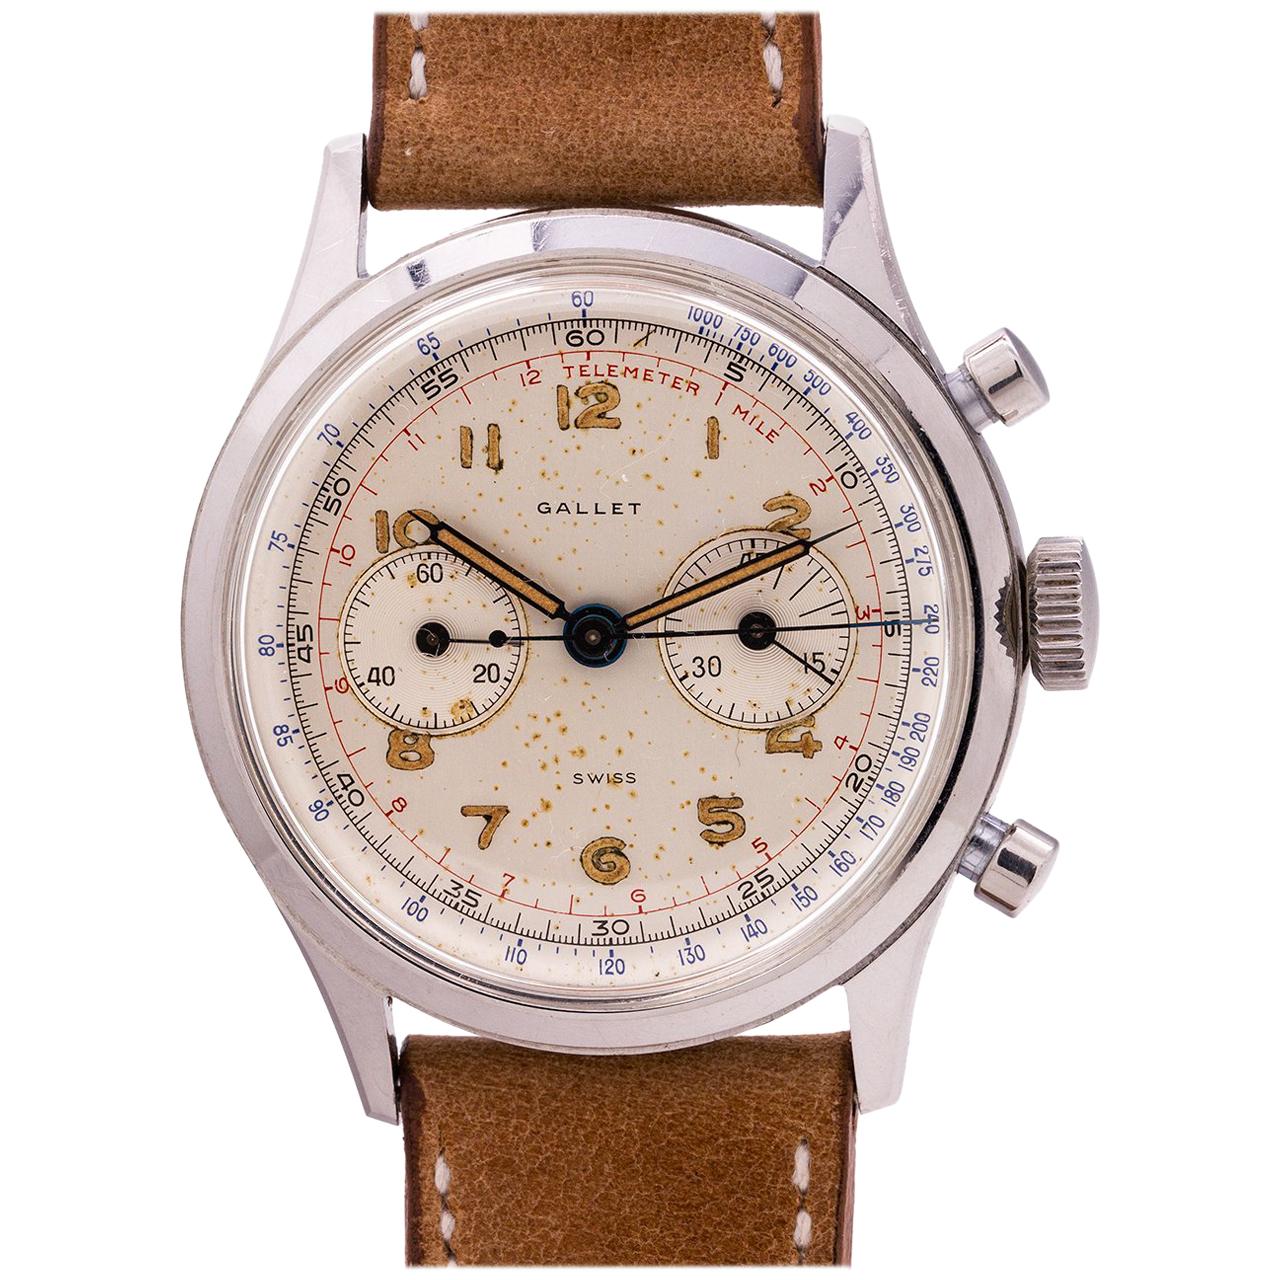 Gallet stainless steel Excelsior Park Chronograph Manual wristwatch, circa 1950 For Sale